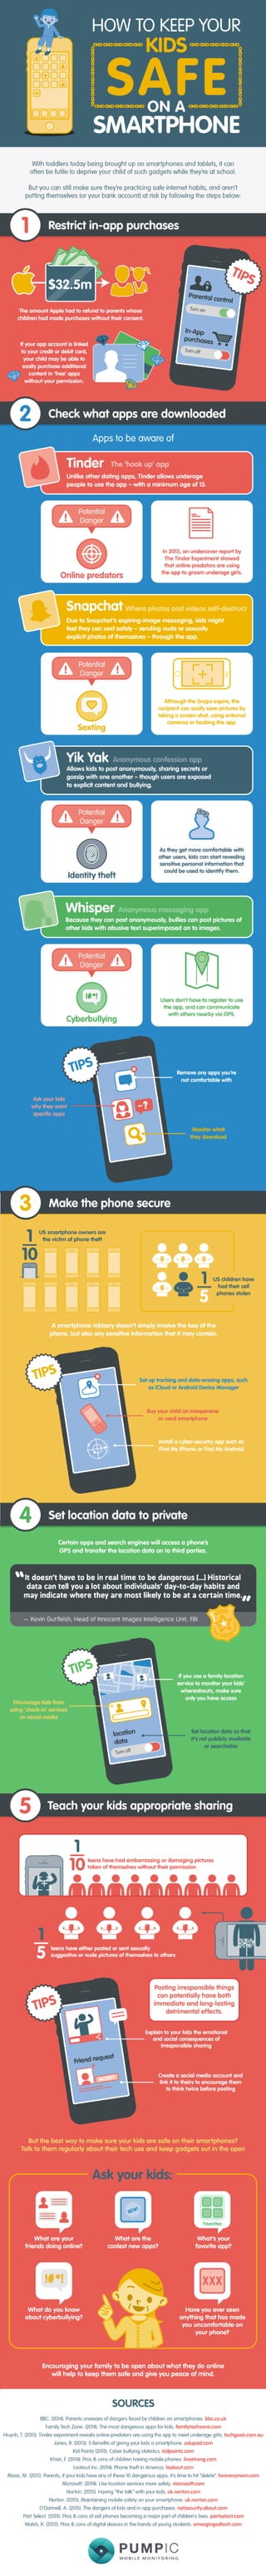 How To Keep Your Kids Safe On A Smartphone